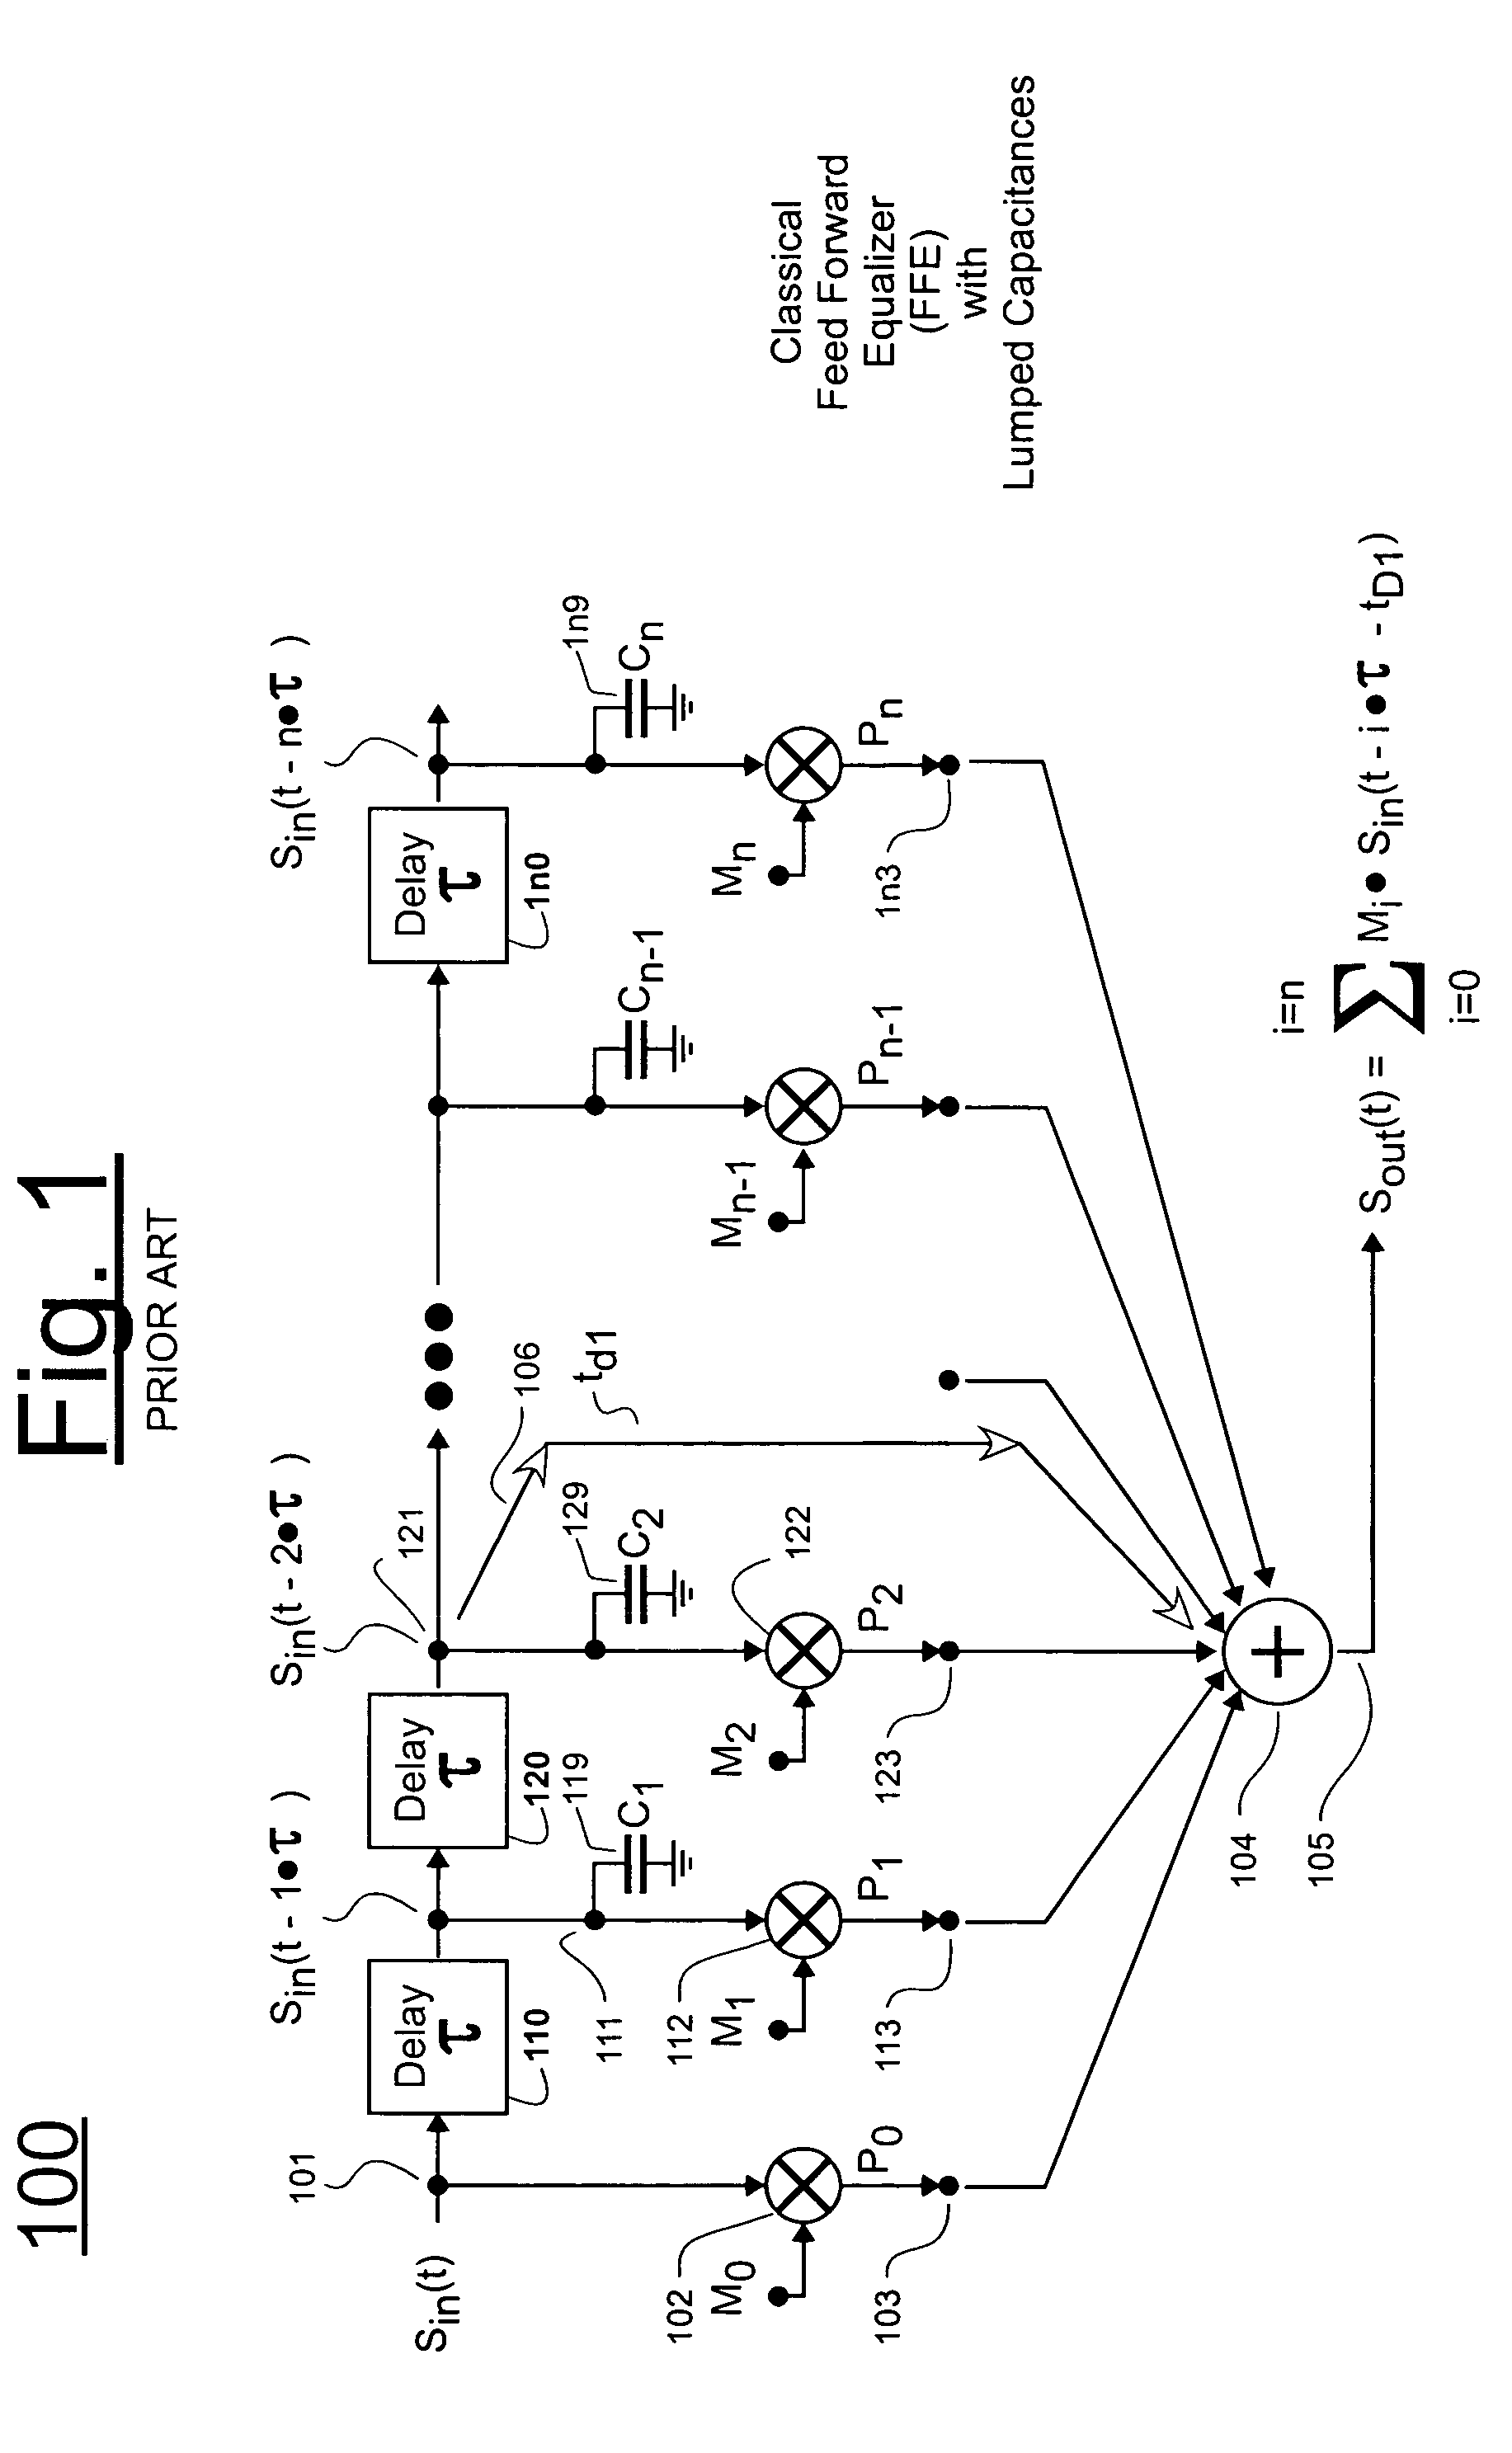 Analog delay chain having more uniformly distributed capacitive loads and analog delay cell for use in chain